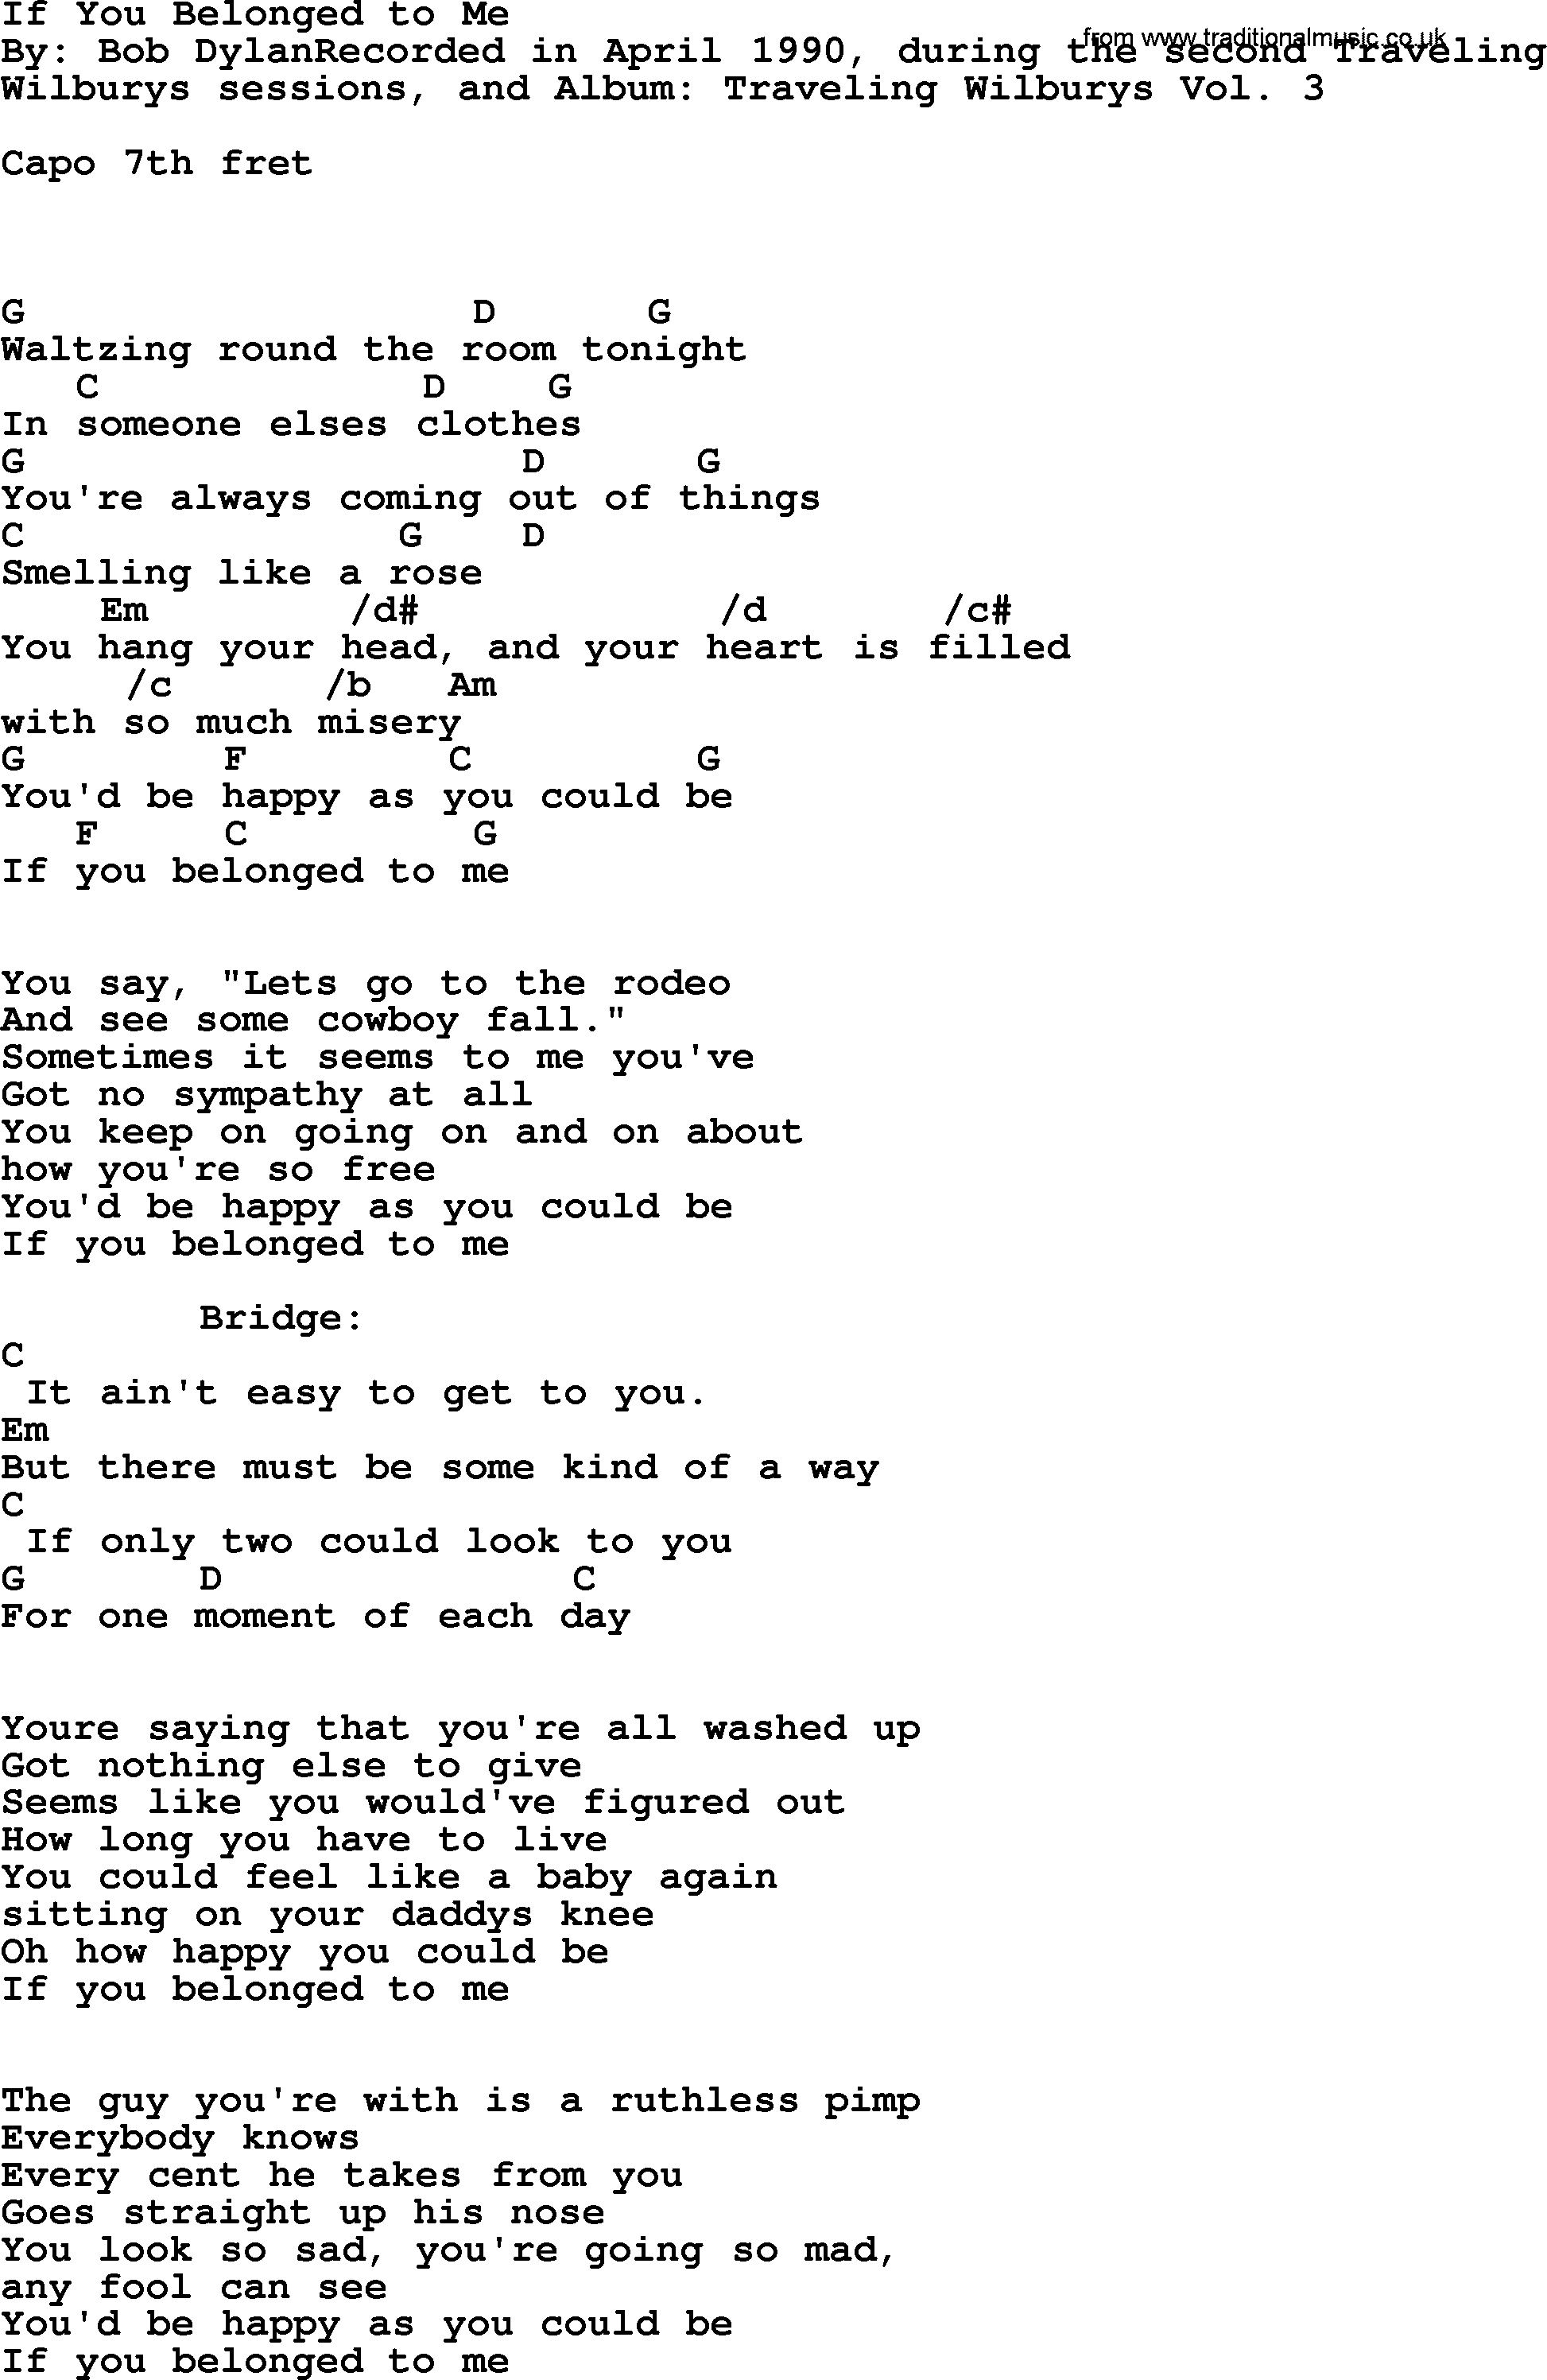 Bob Dylan song, lyrics with chords - If You Belonged to Me